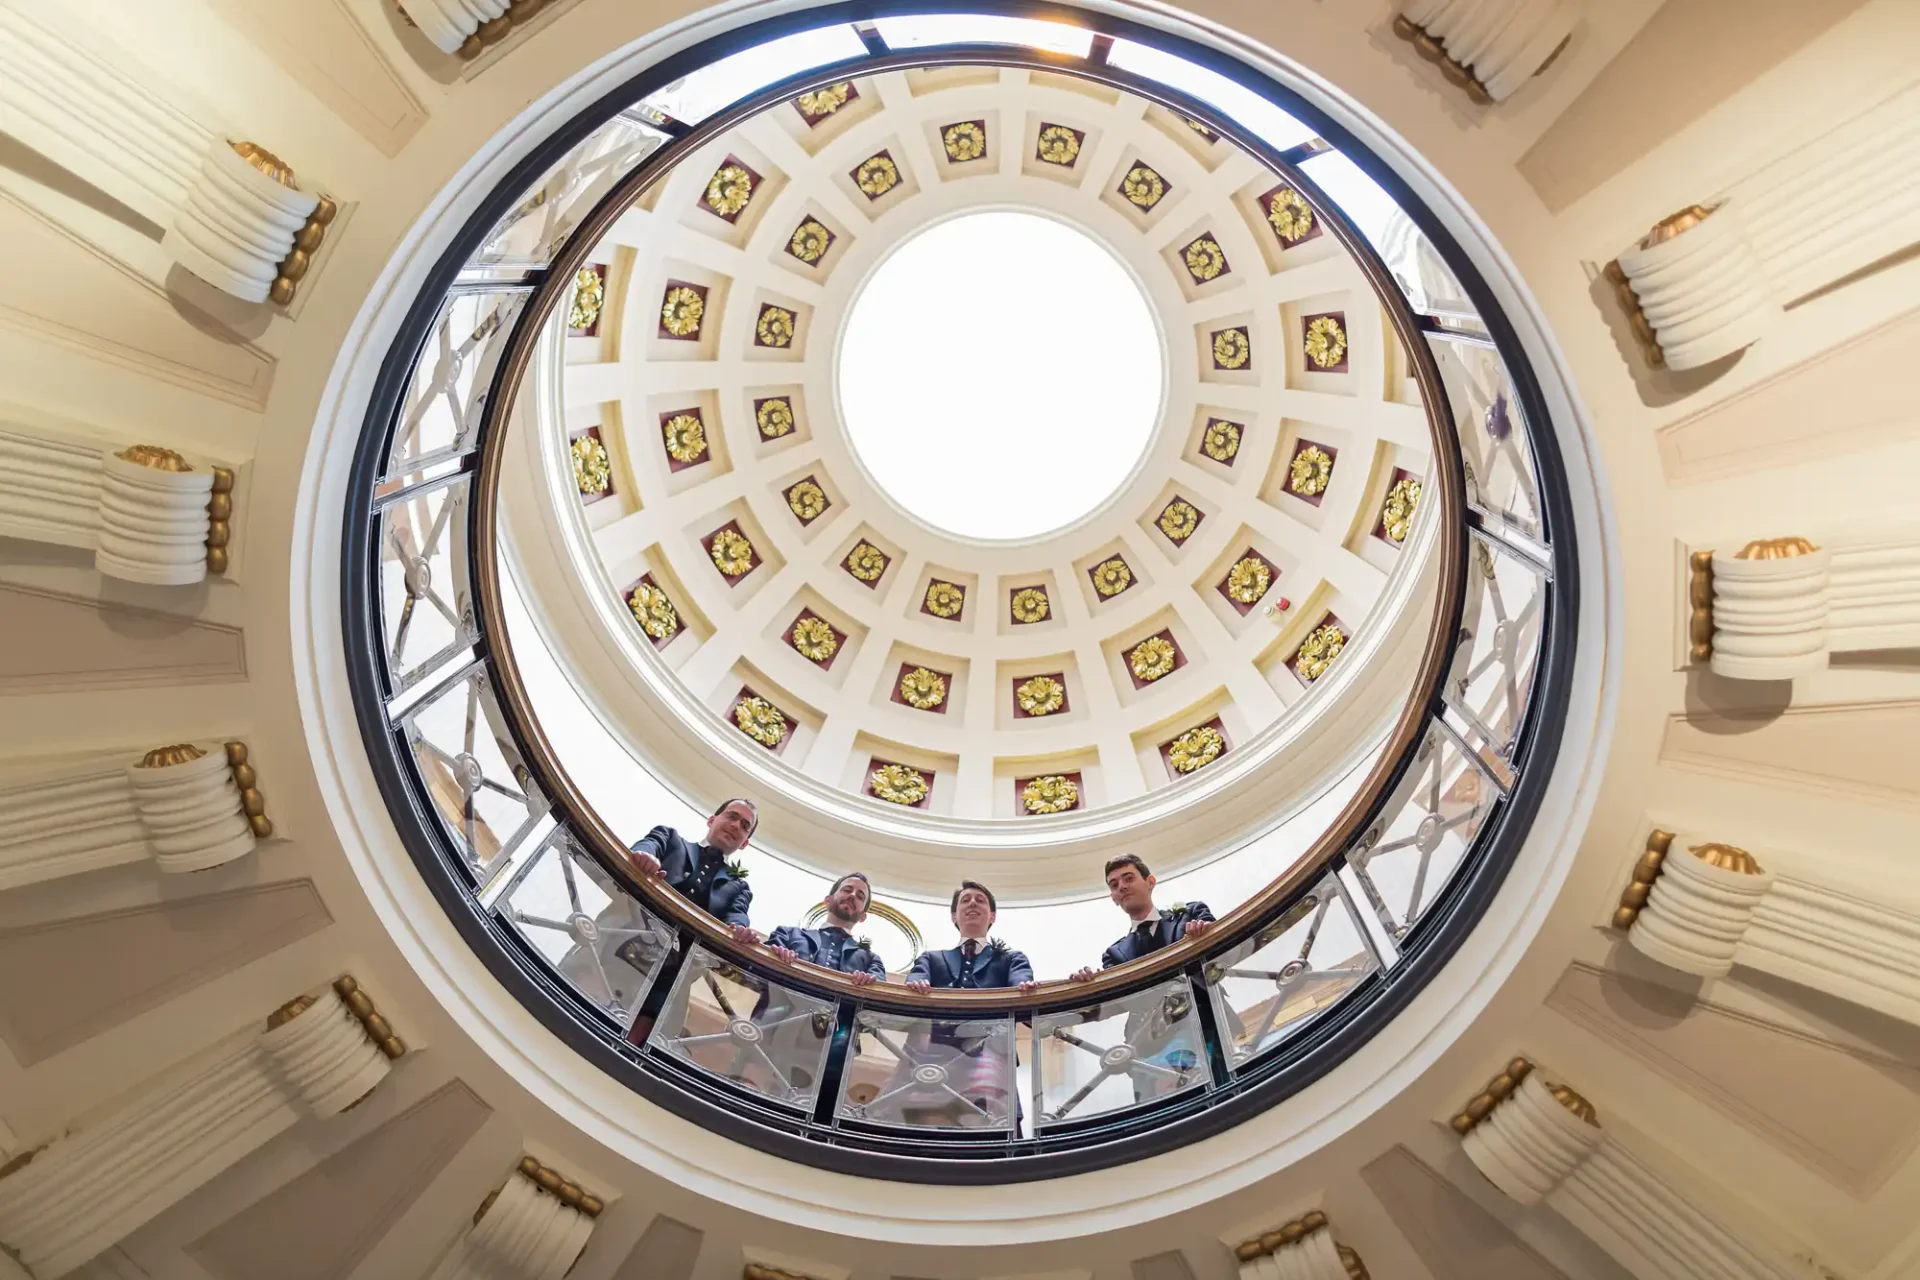 Four people standing on a balcony under a large circular skylight in an ornate building with neoclassical architecture.